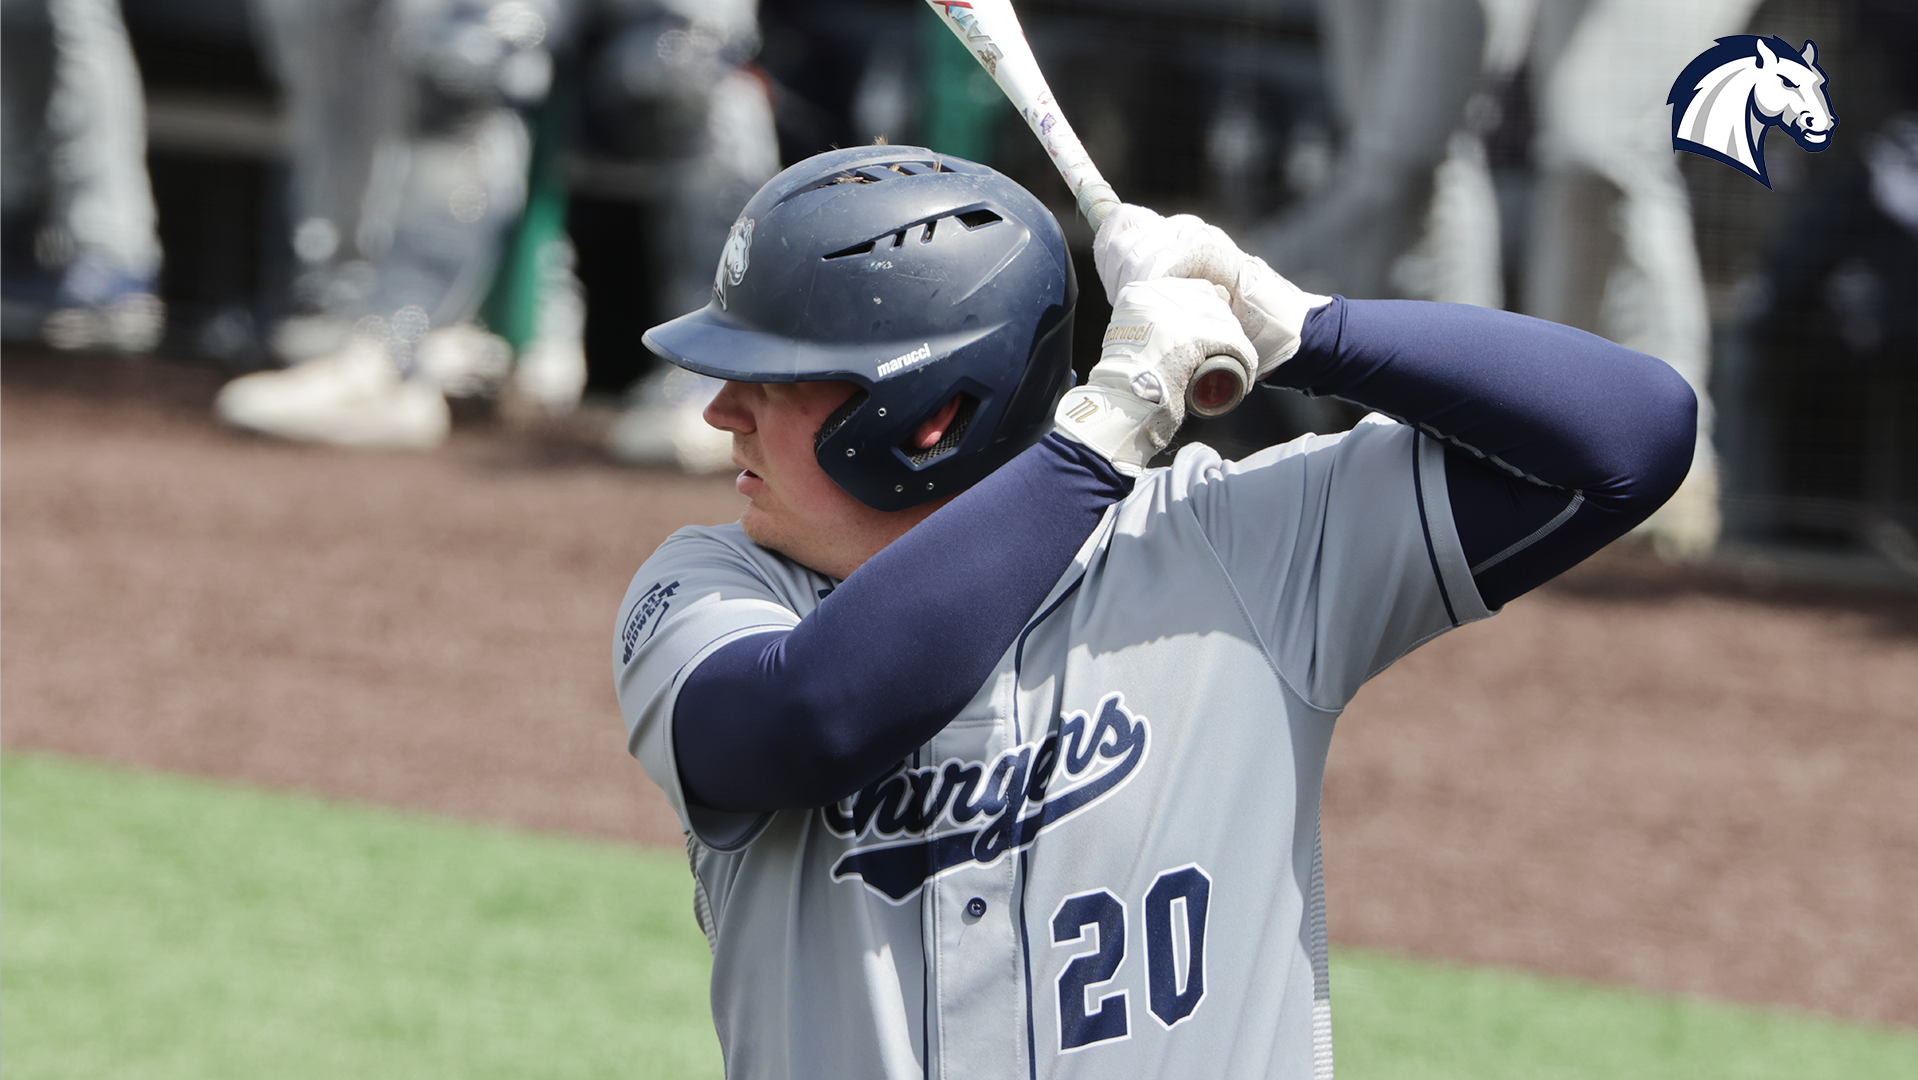 Chargers bats explode to beat Ashland, lock up top four seed in G-MAC Tourney